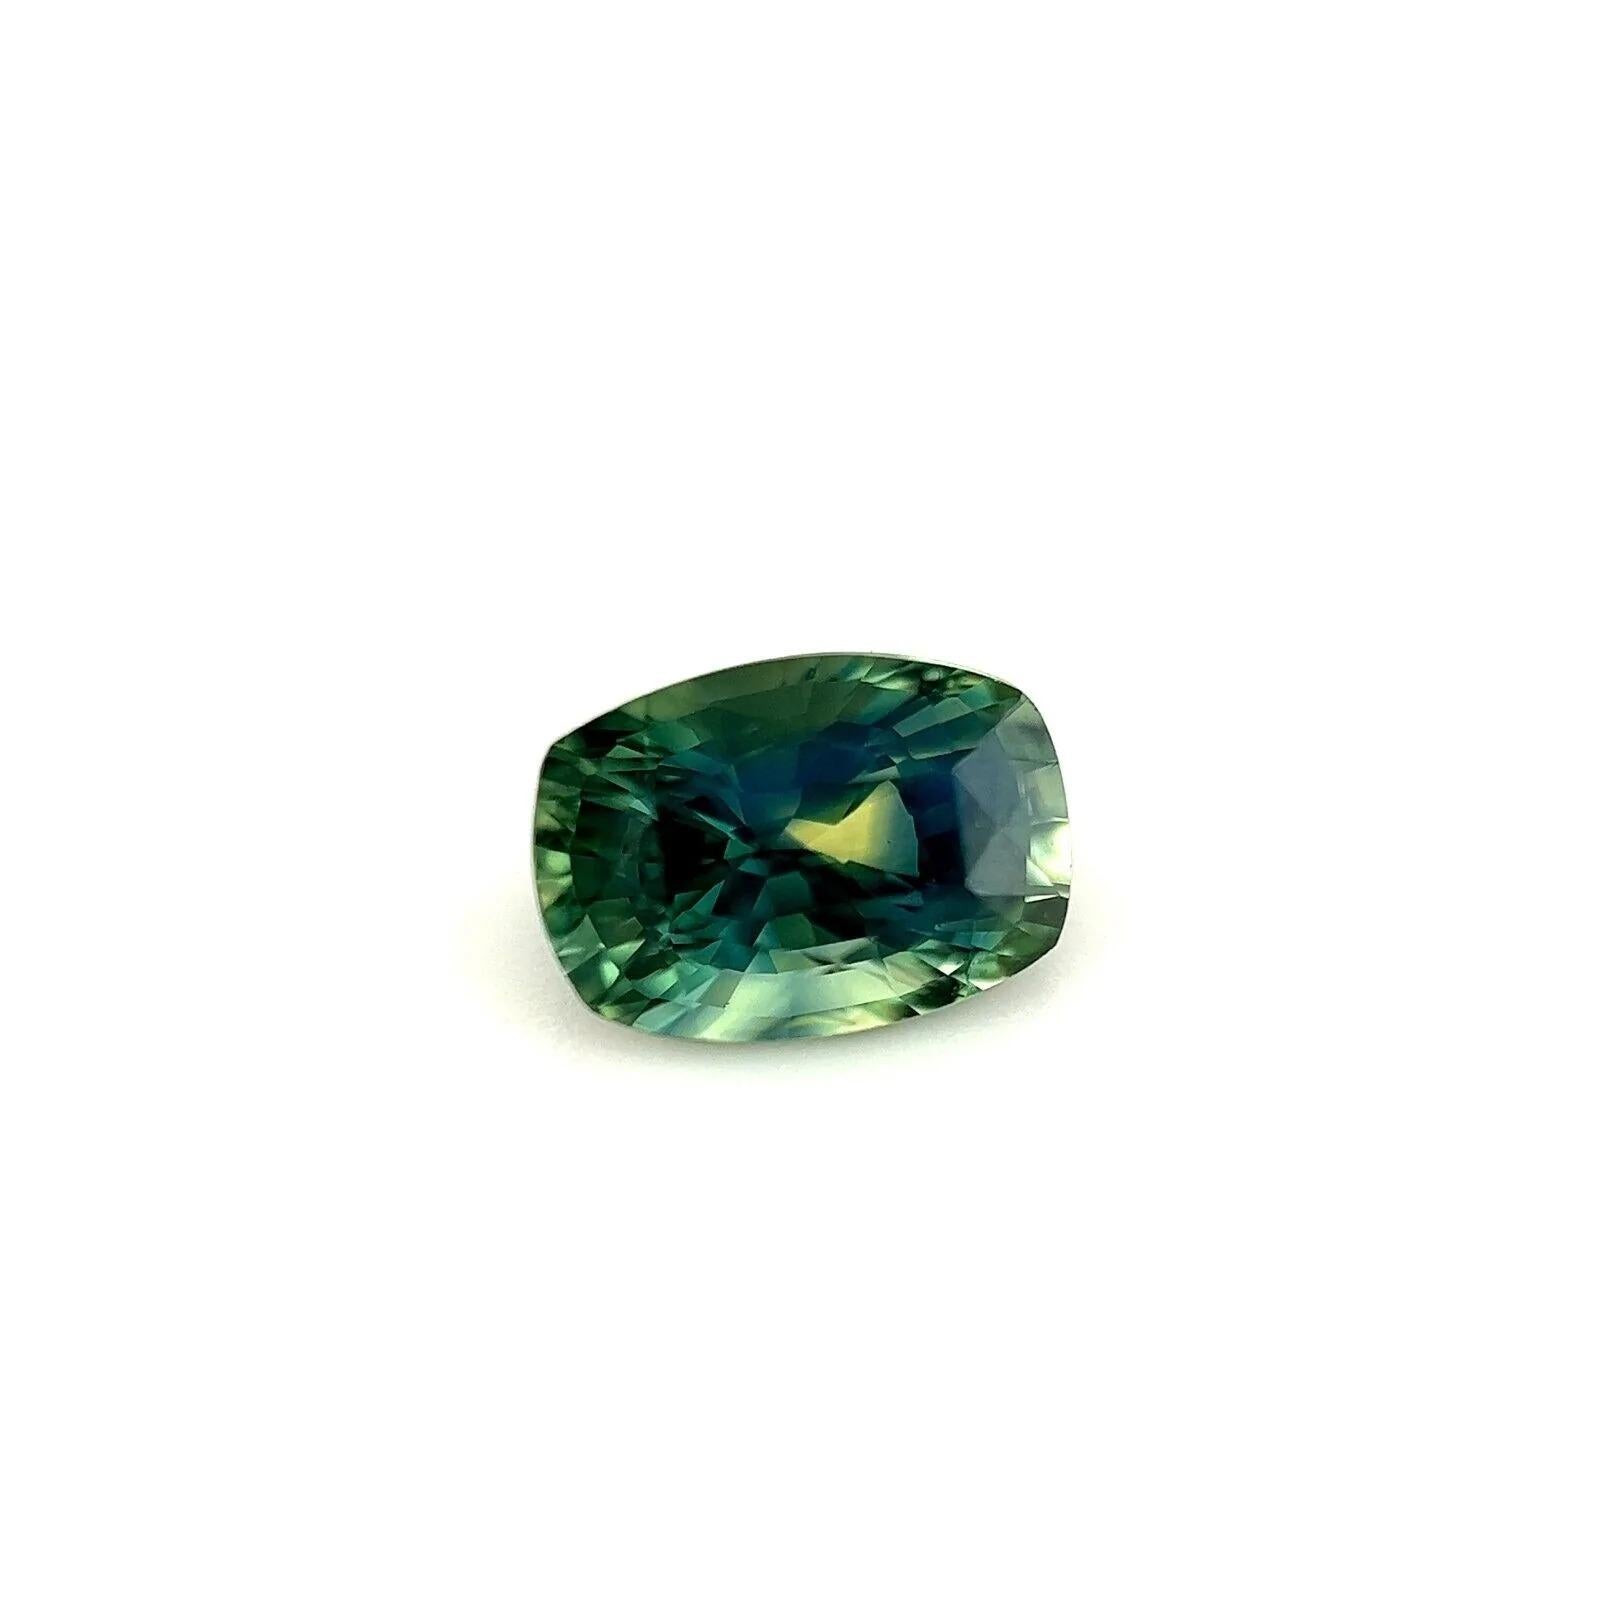 Unique 1.26ct GIA Certified Parti Colour Sapphire Green Blue Rare Cushion

Unique Rare Parti Colour Australian Sapphire Gemstone.
1.26 Carat sapphire with a rare bi colour effect. Showing blue and green colours with a unique colour zoning. Very rare